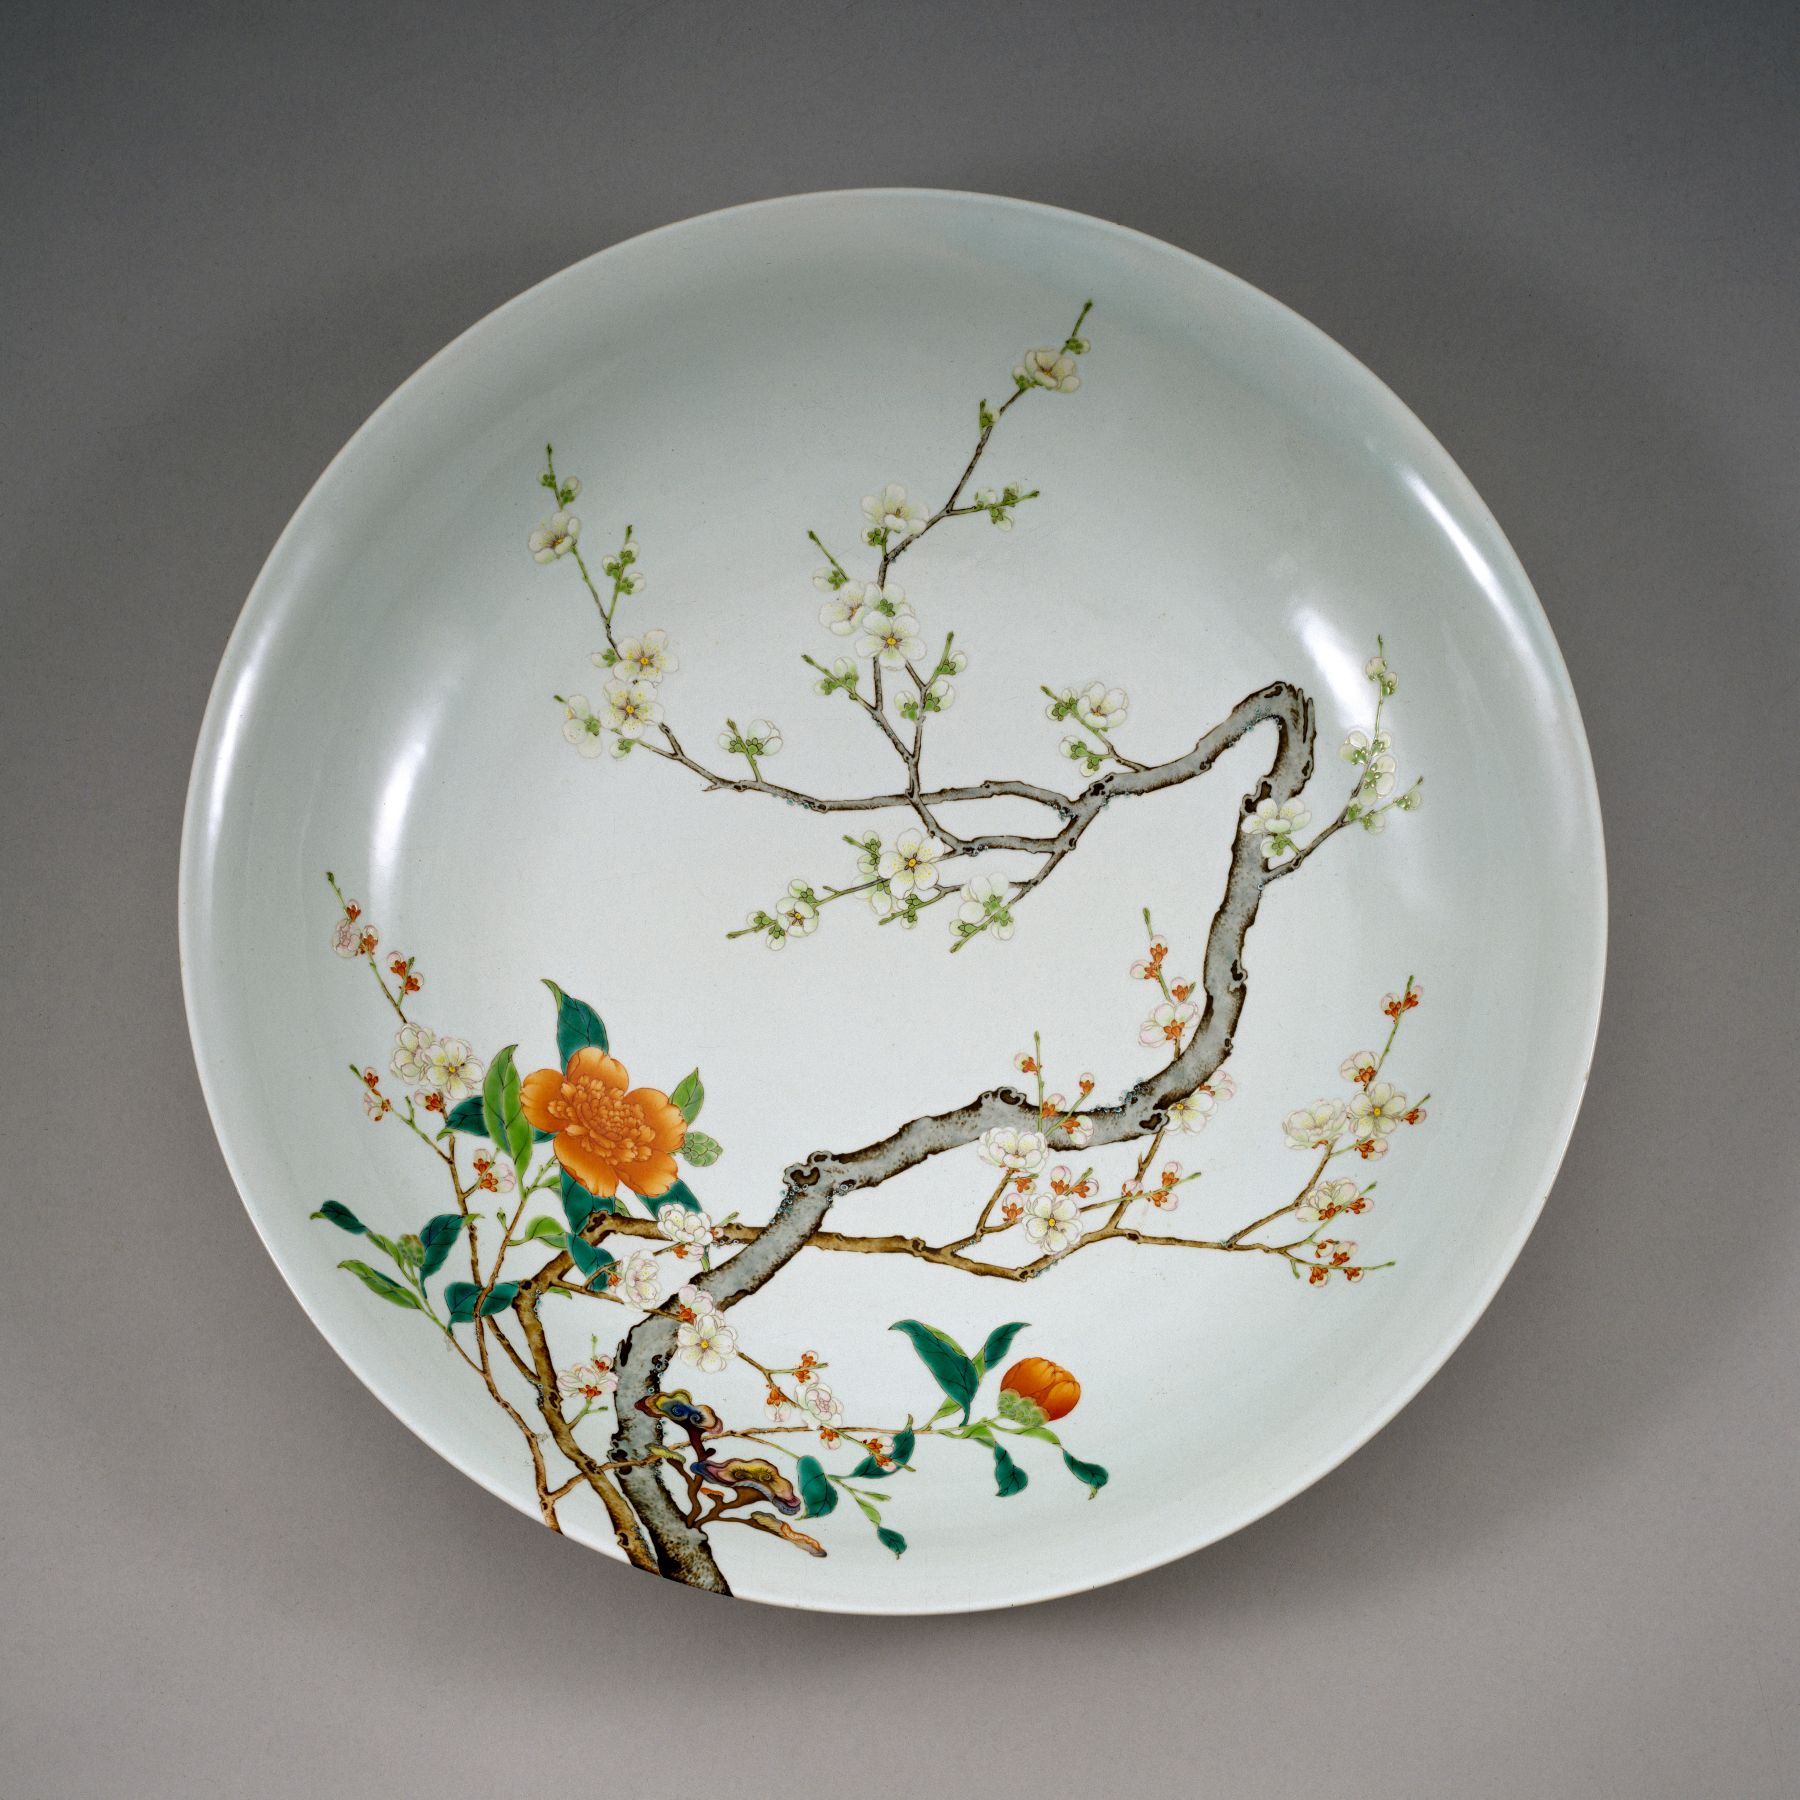 Chinese ceramic bowl auctioned off in Hong Kong